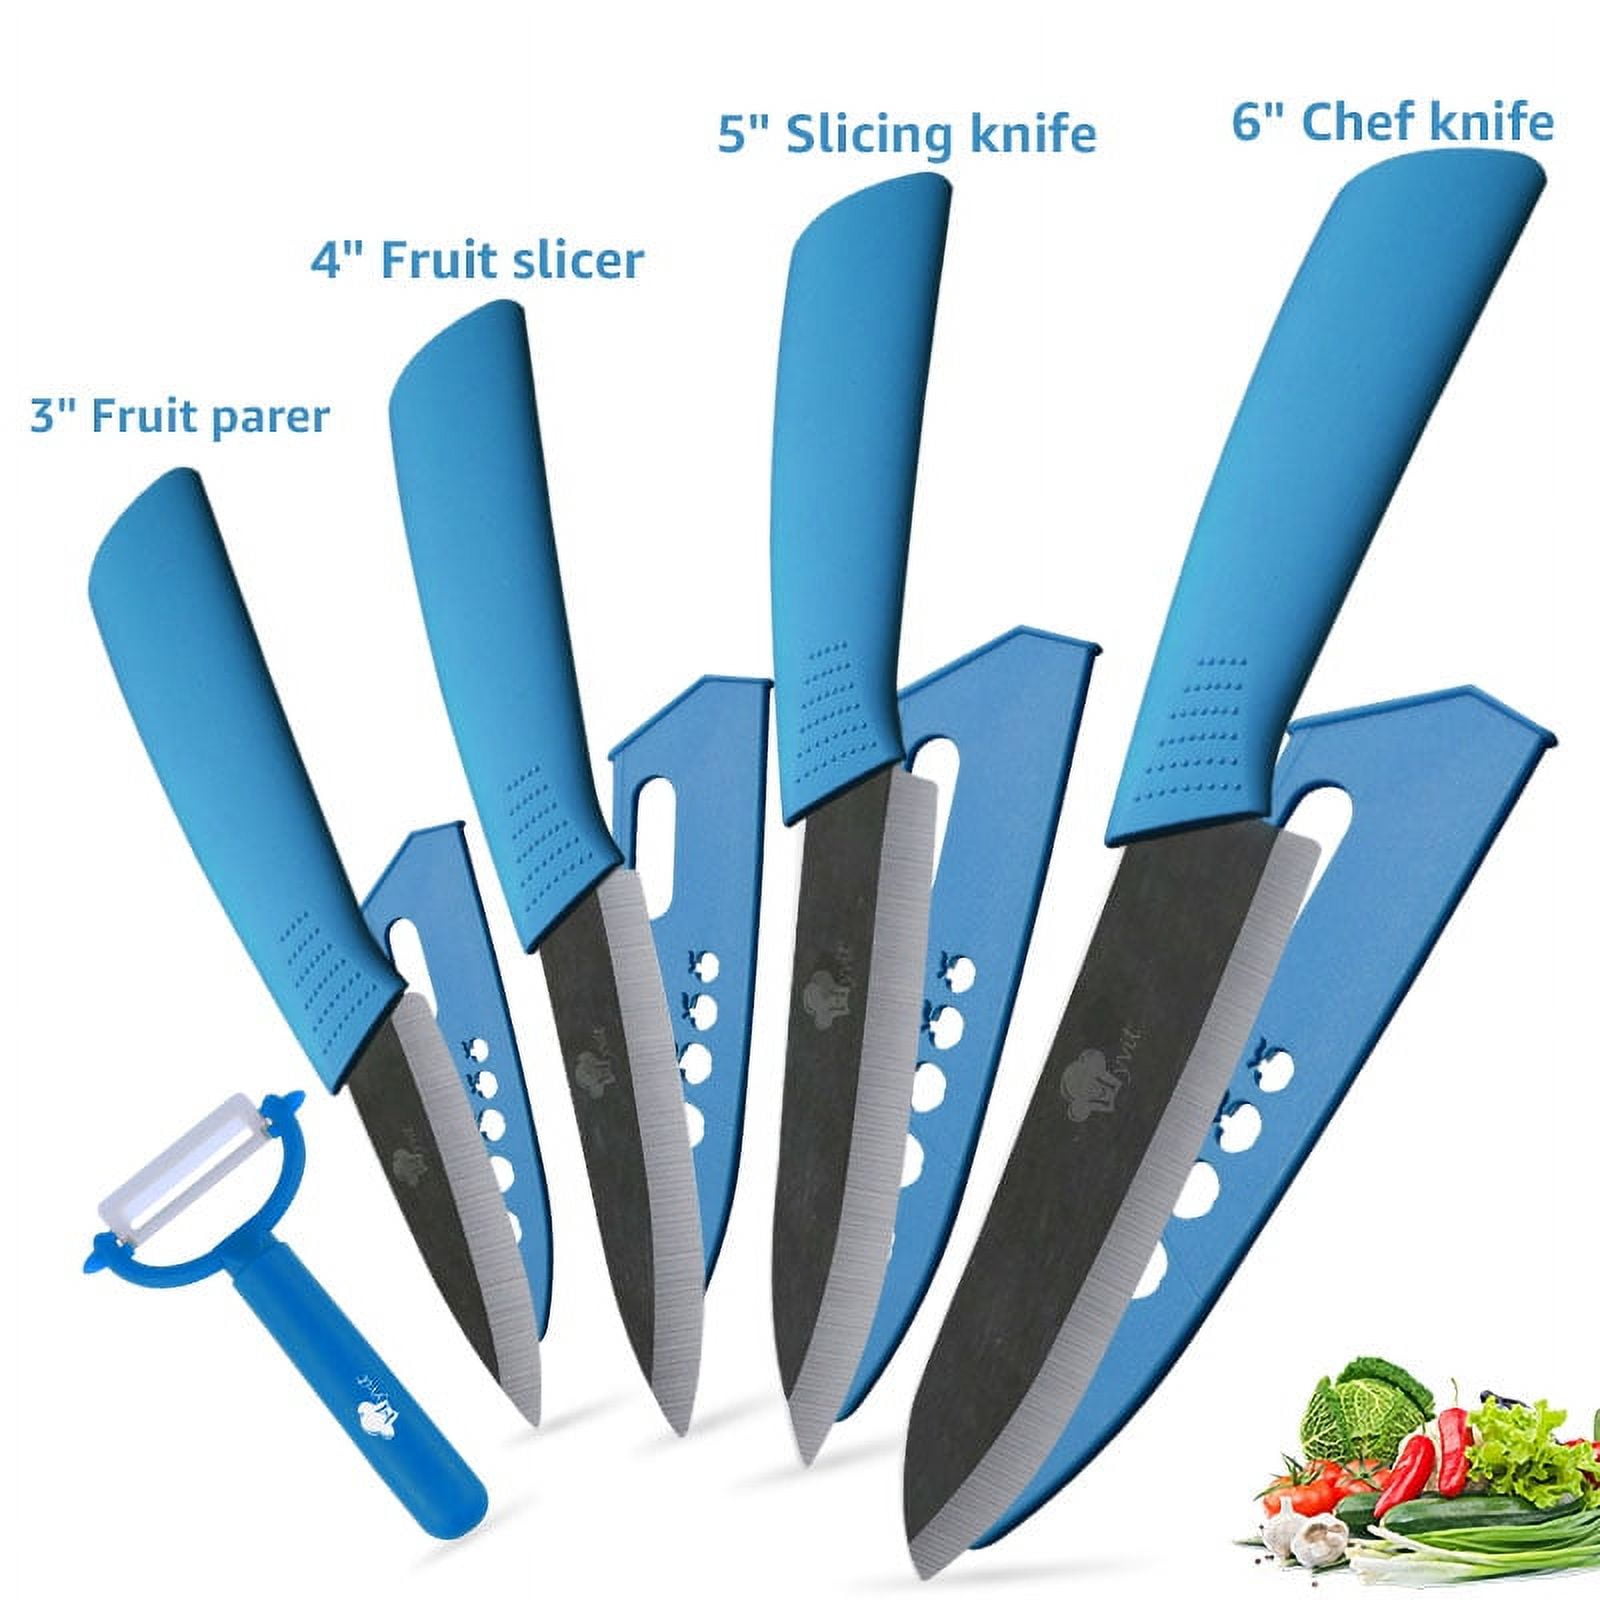 Ceramic Knife Set,All in One Knives Set for Kitchen, Non Rust White Zirconia Blade with Sheaths,Slicer,Peeler, Chef Knife,Ceramic Paring Knife 3 inch